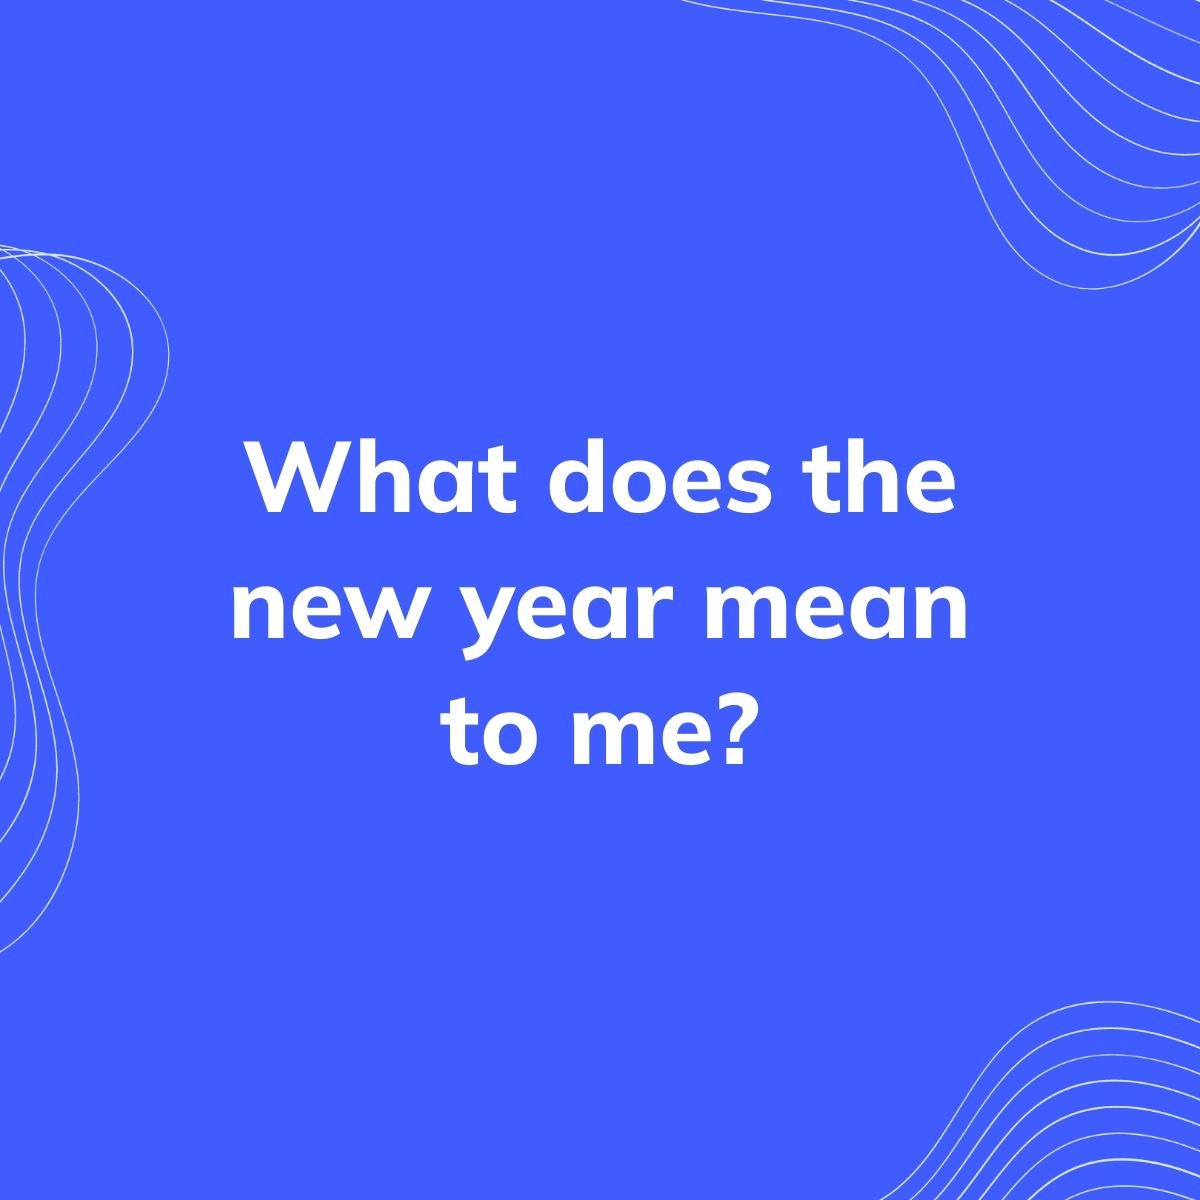 Journal Prompt: What does the new year mean to me?